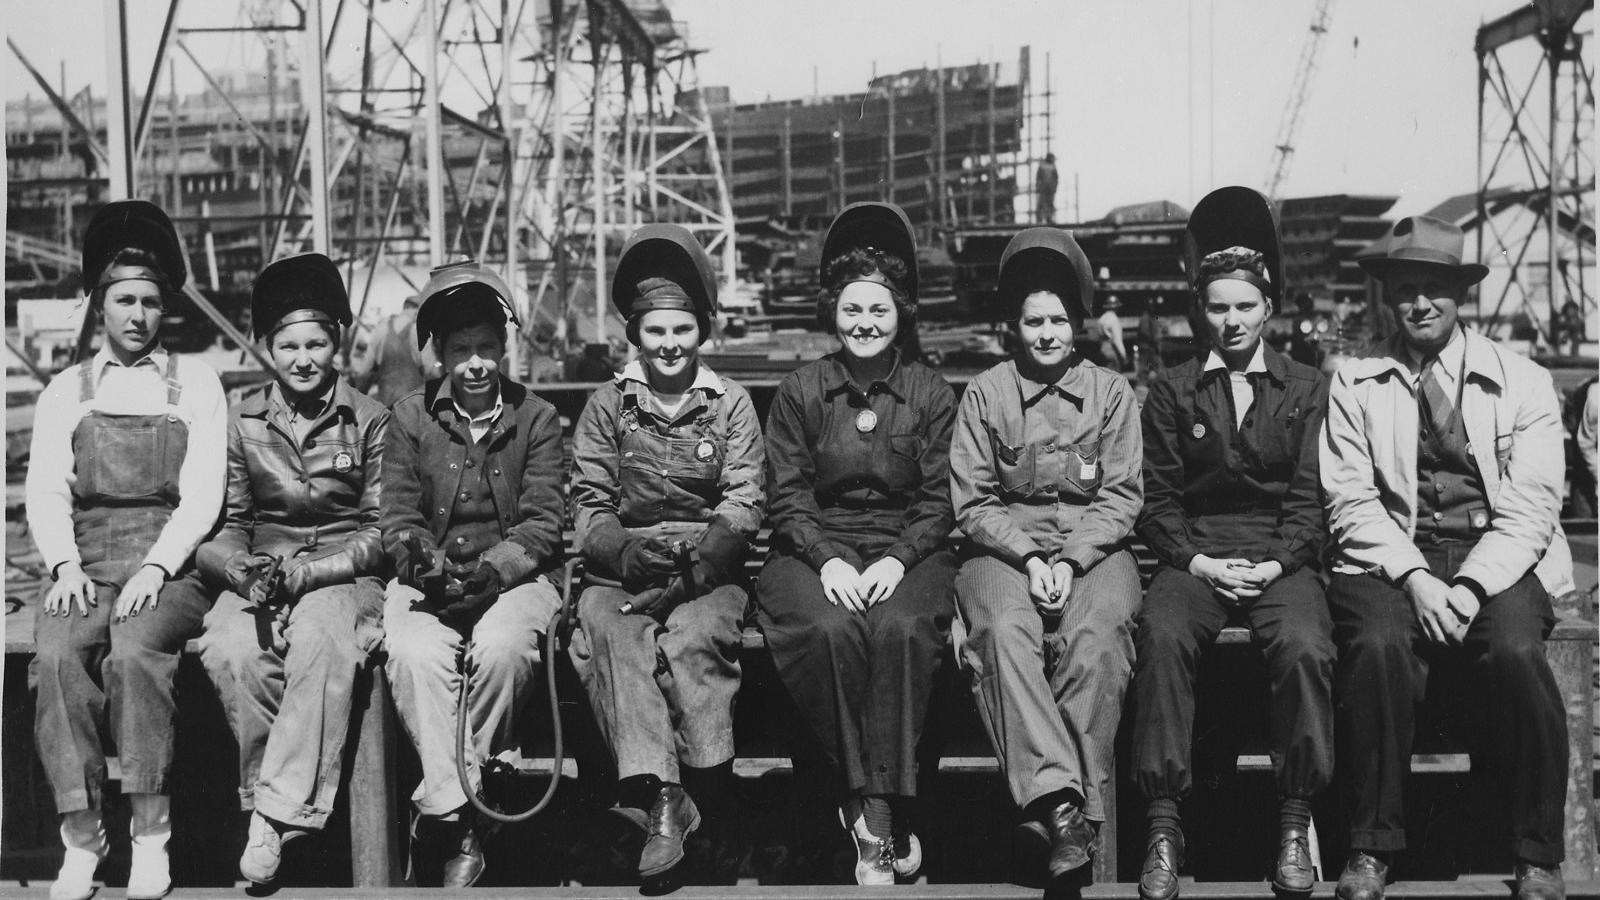 women in coveralls and one man in trench coat sitting in a line on a girder.